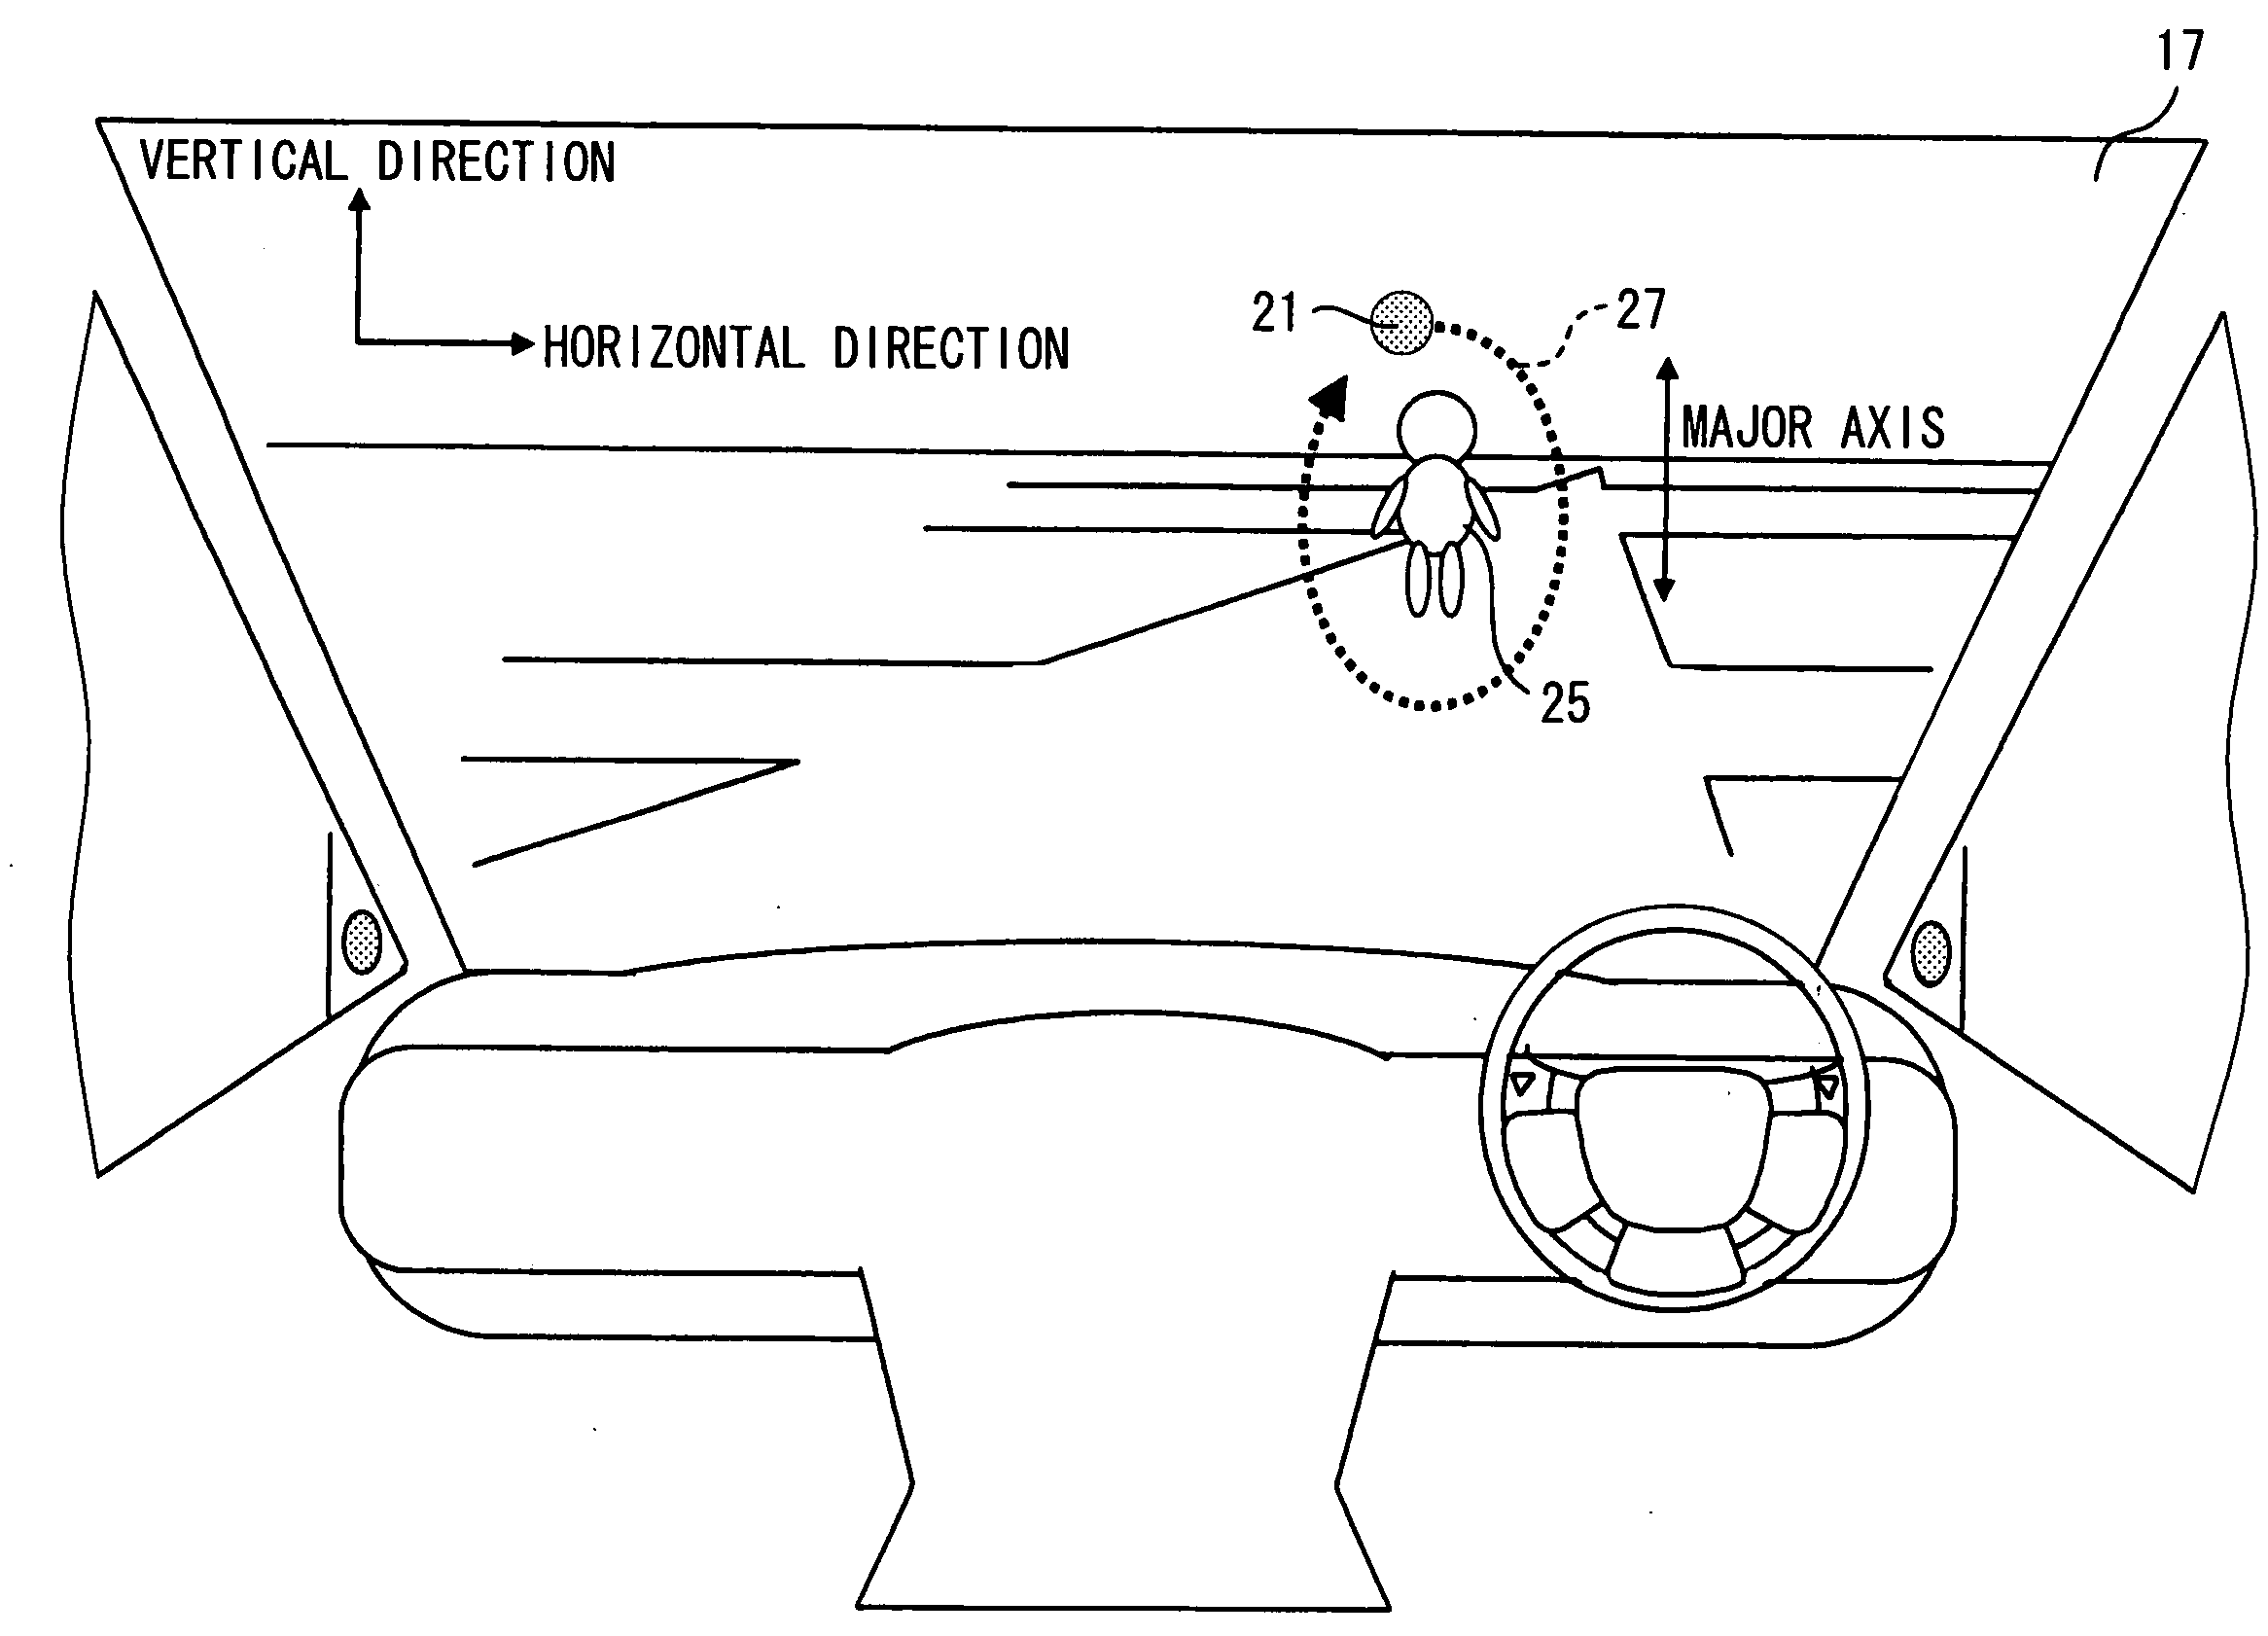 Automotive display device showing virtual image spot encircling front obstacle